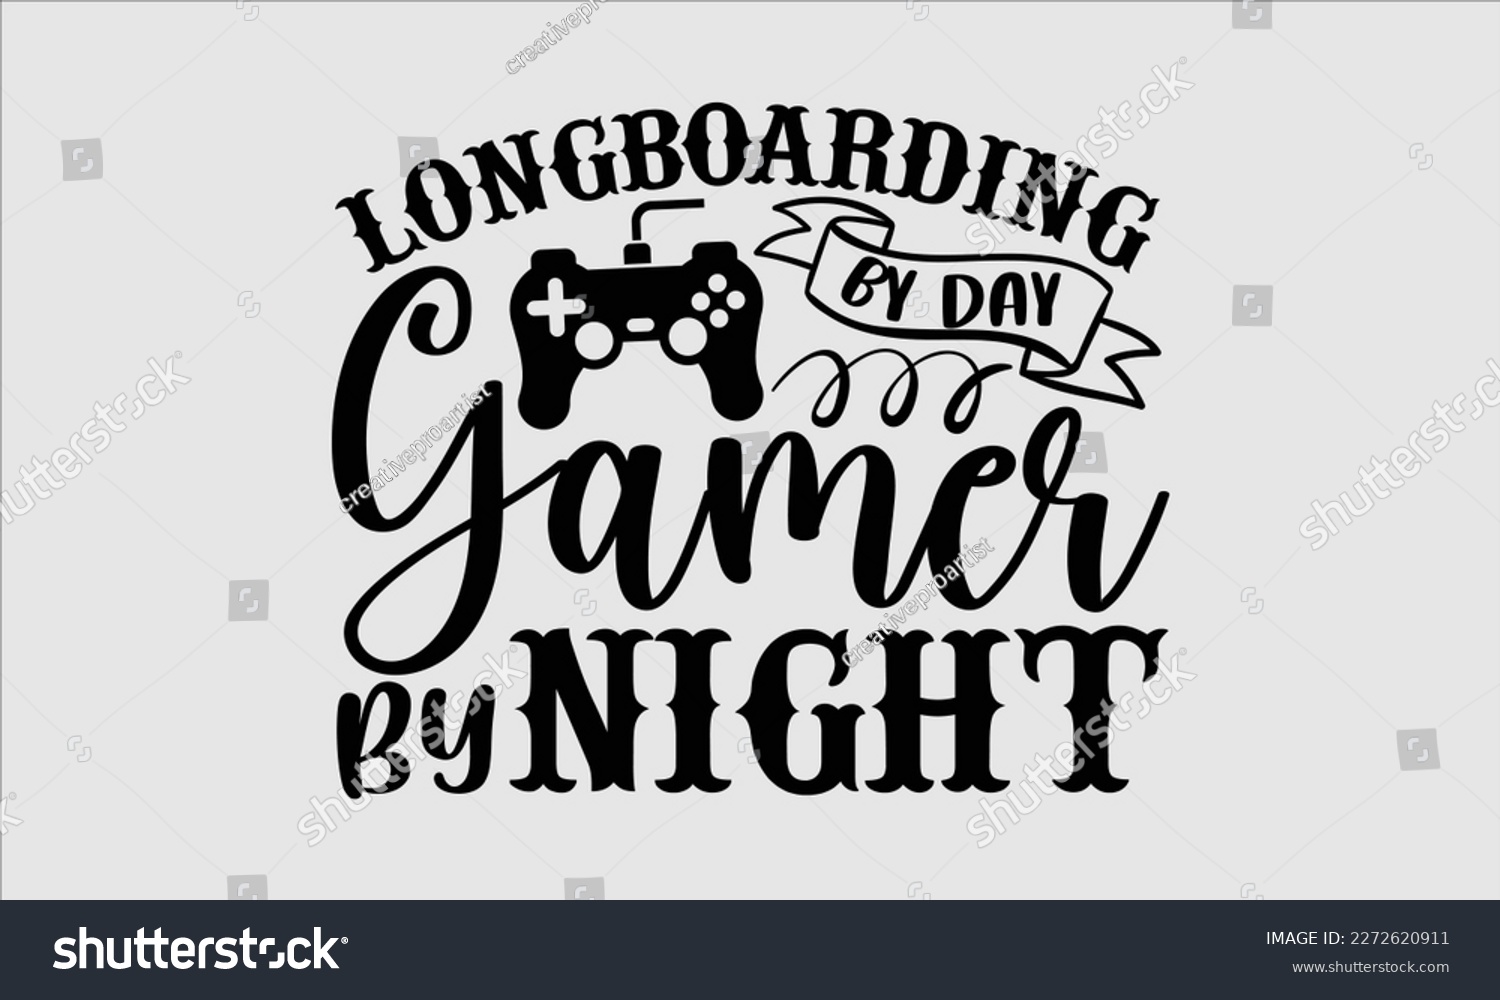 SVG of Longboarding by day gamer by night- Longboarding T- shirt Design, Hand drawn lettering phrase, Illustration for prints on t-shirts and bags, posters, funny eps files, svg cricut svg